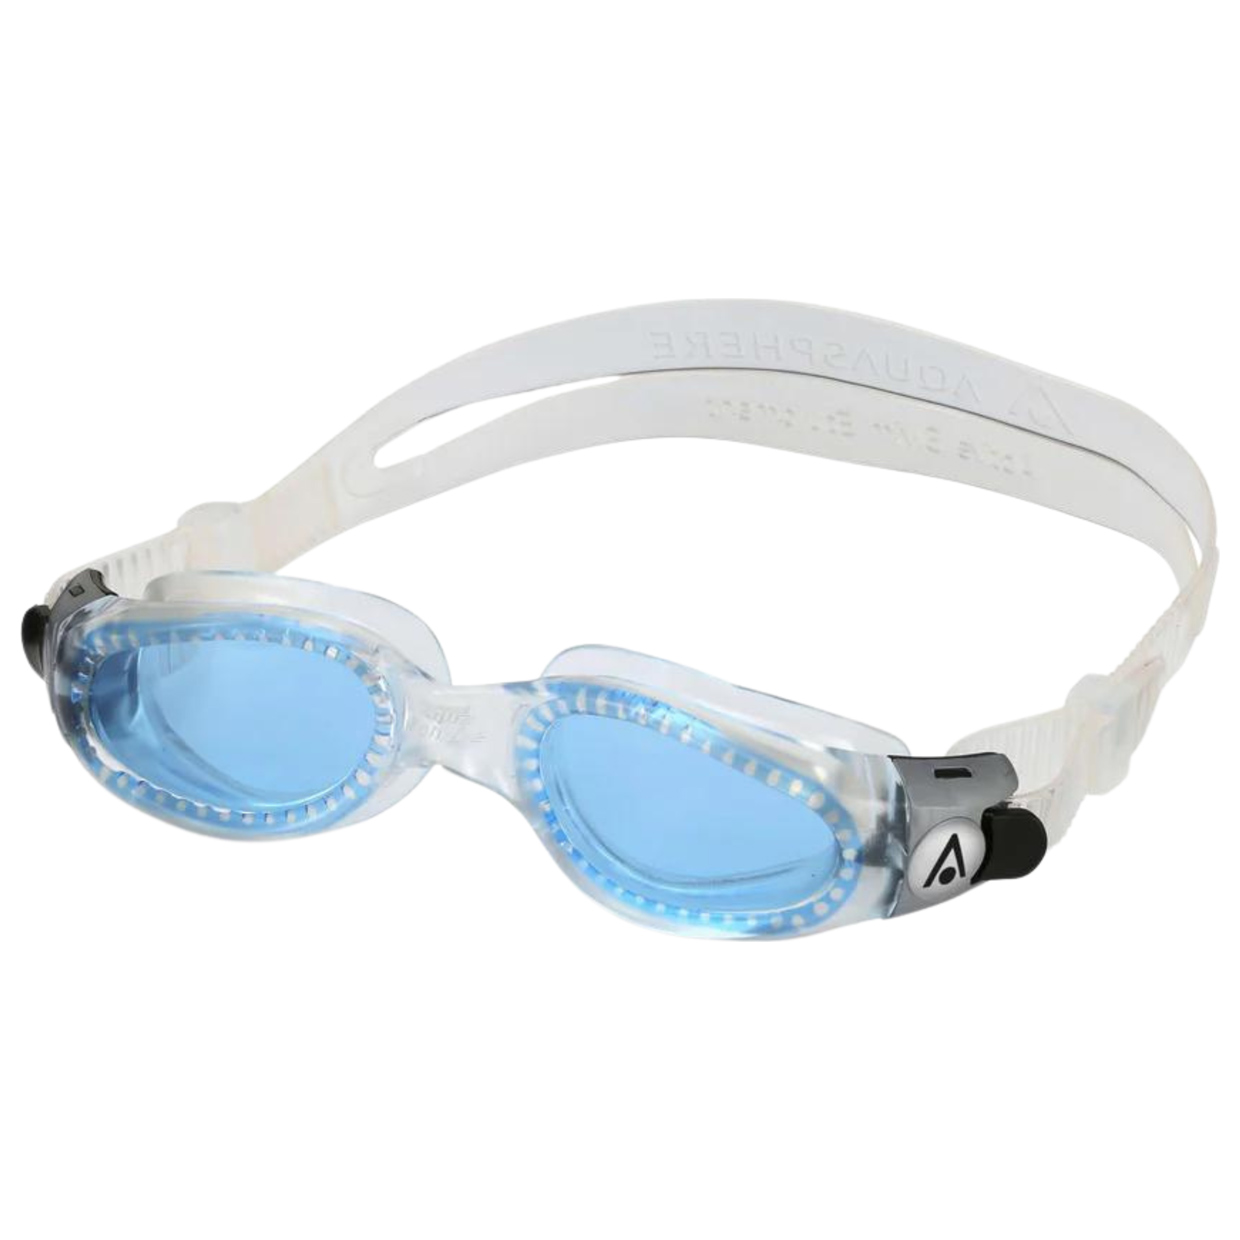 Schwimmbrille Kaiman Compact